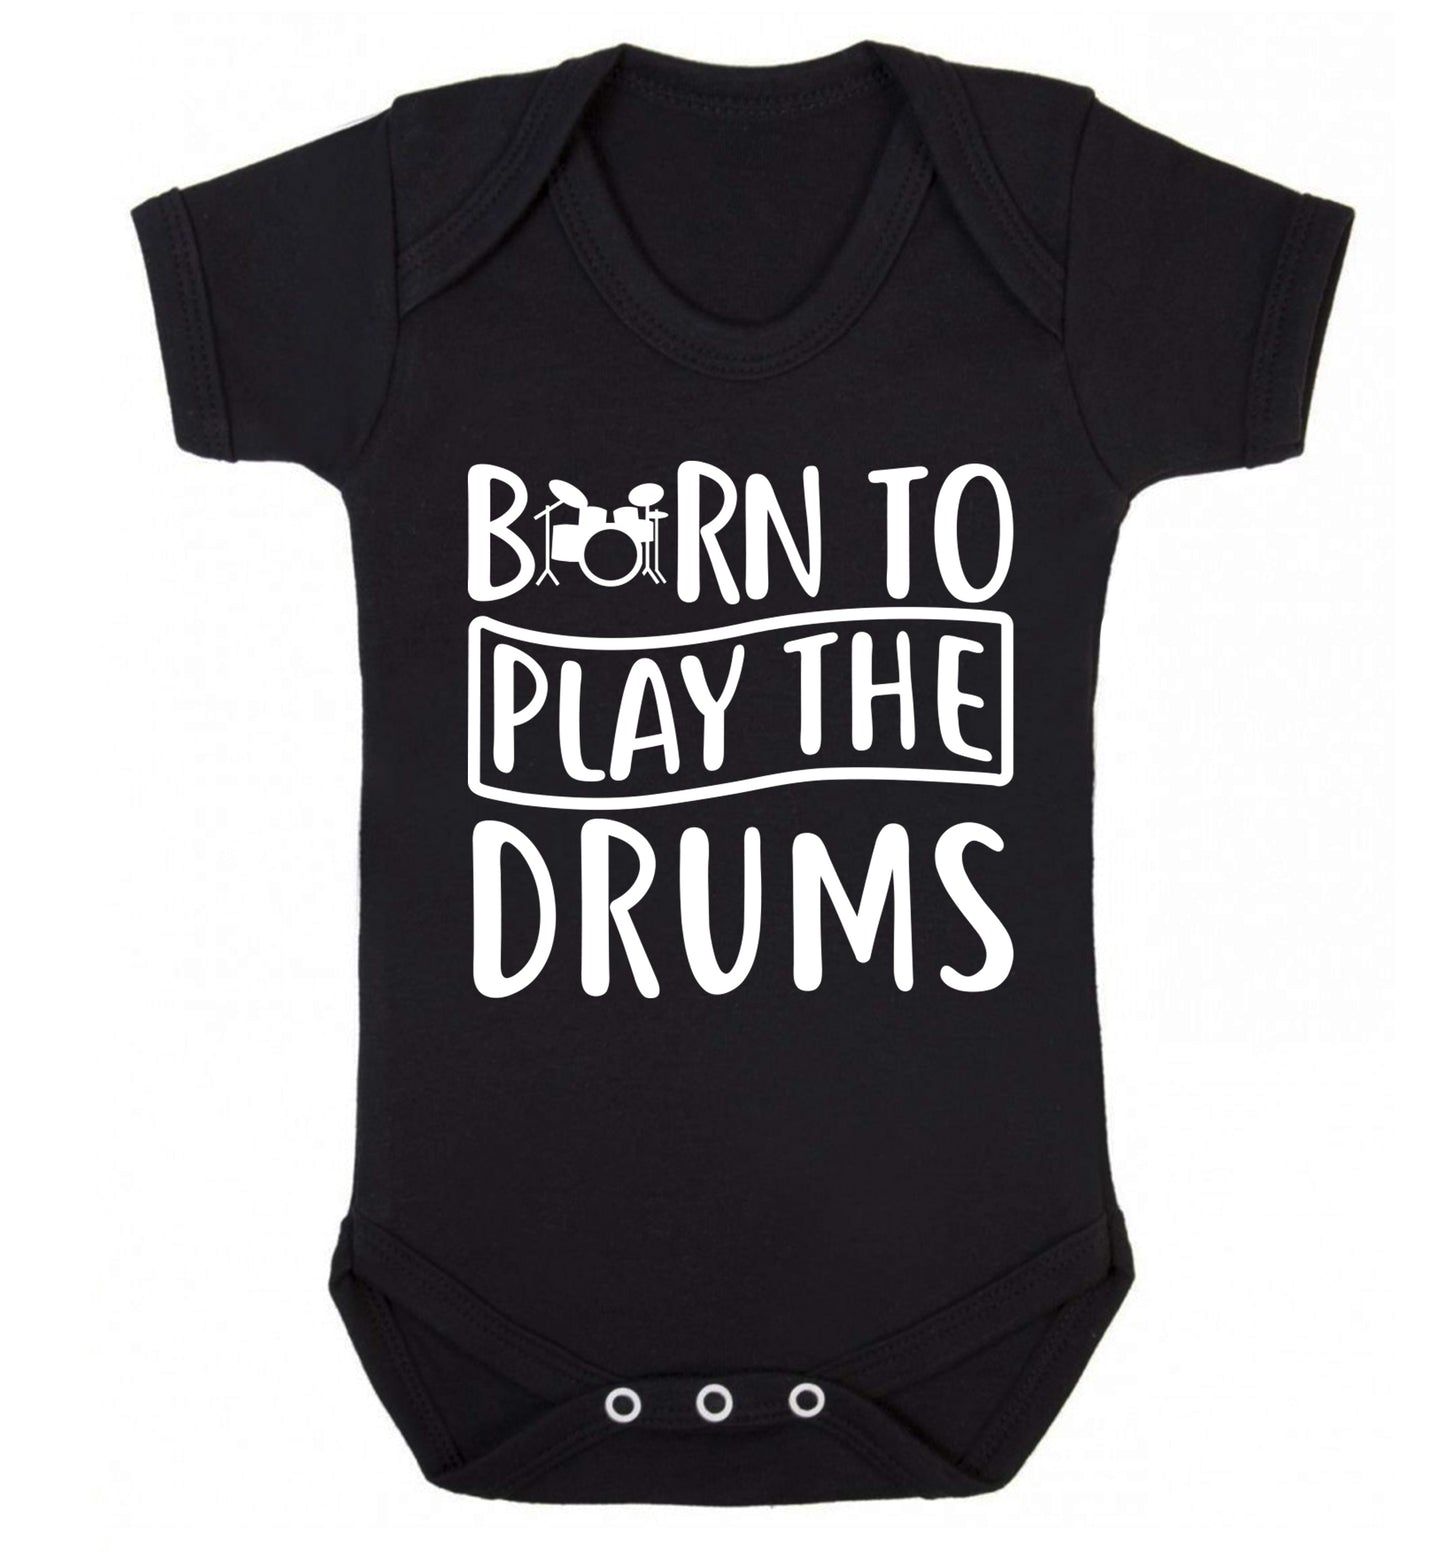 Born to play the drums Baby Vest black 18-24 months